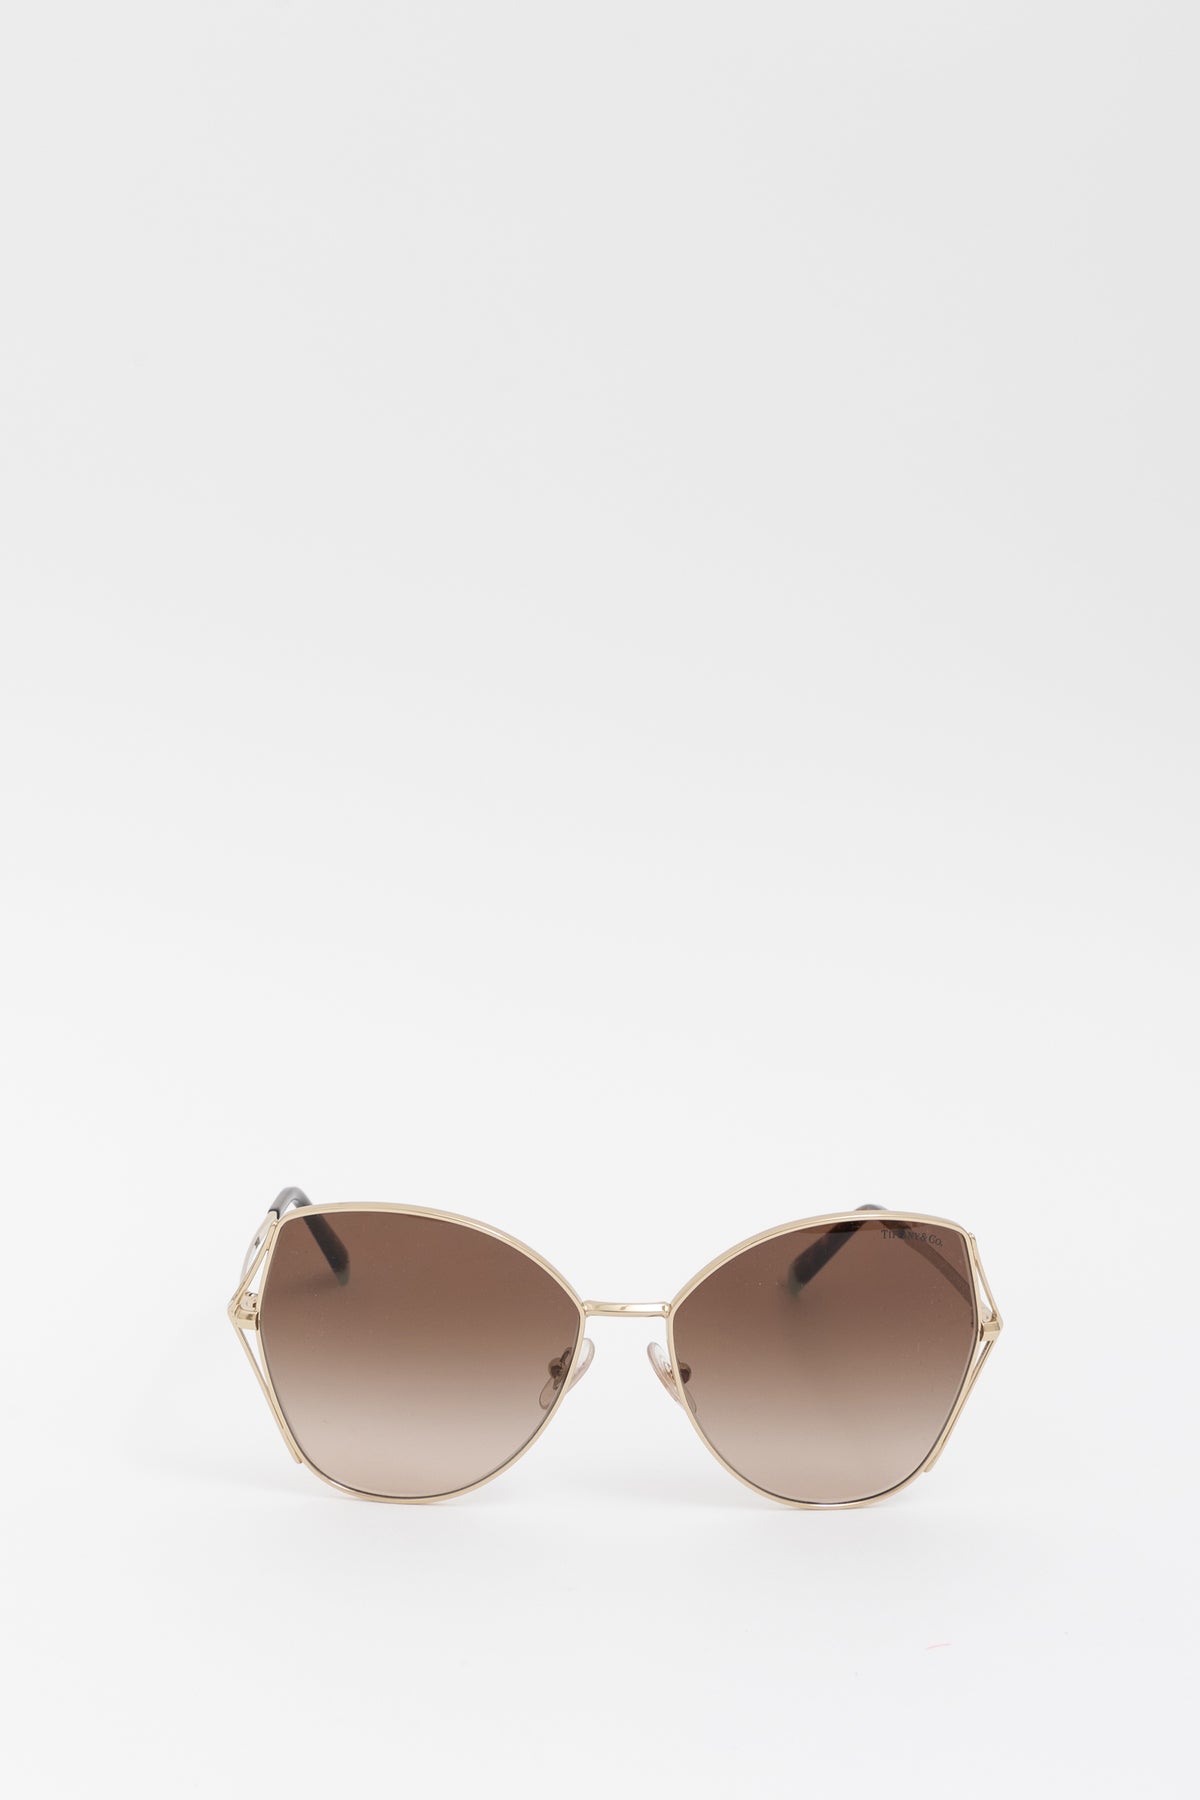 Gold Sunglasses with Tortoiseshell Arms